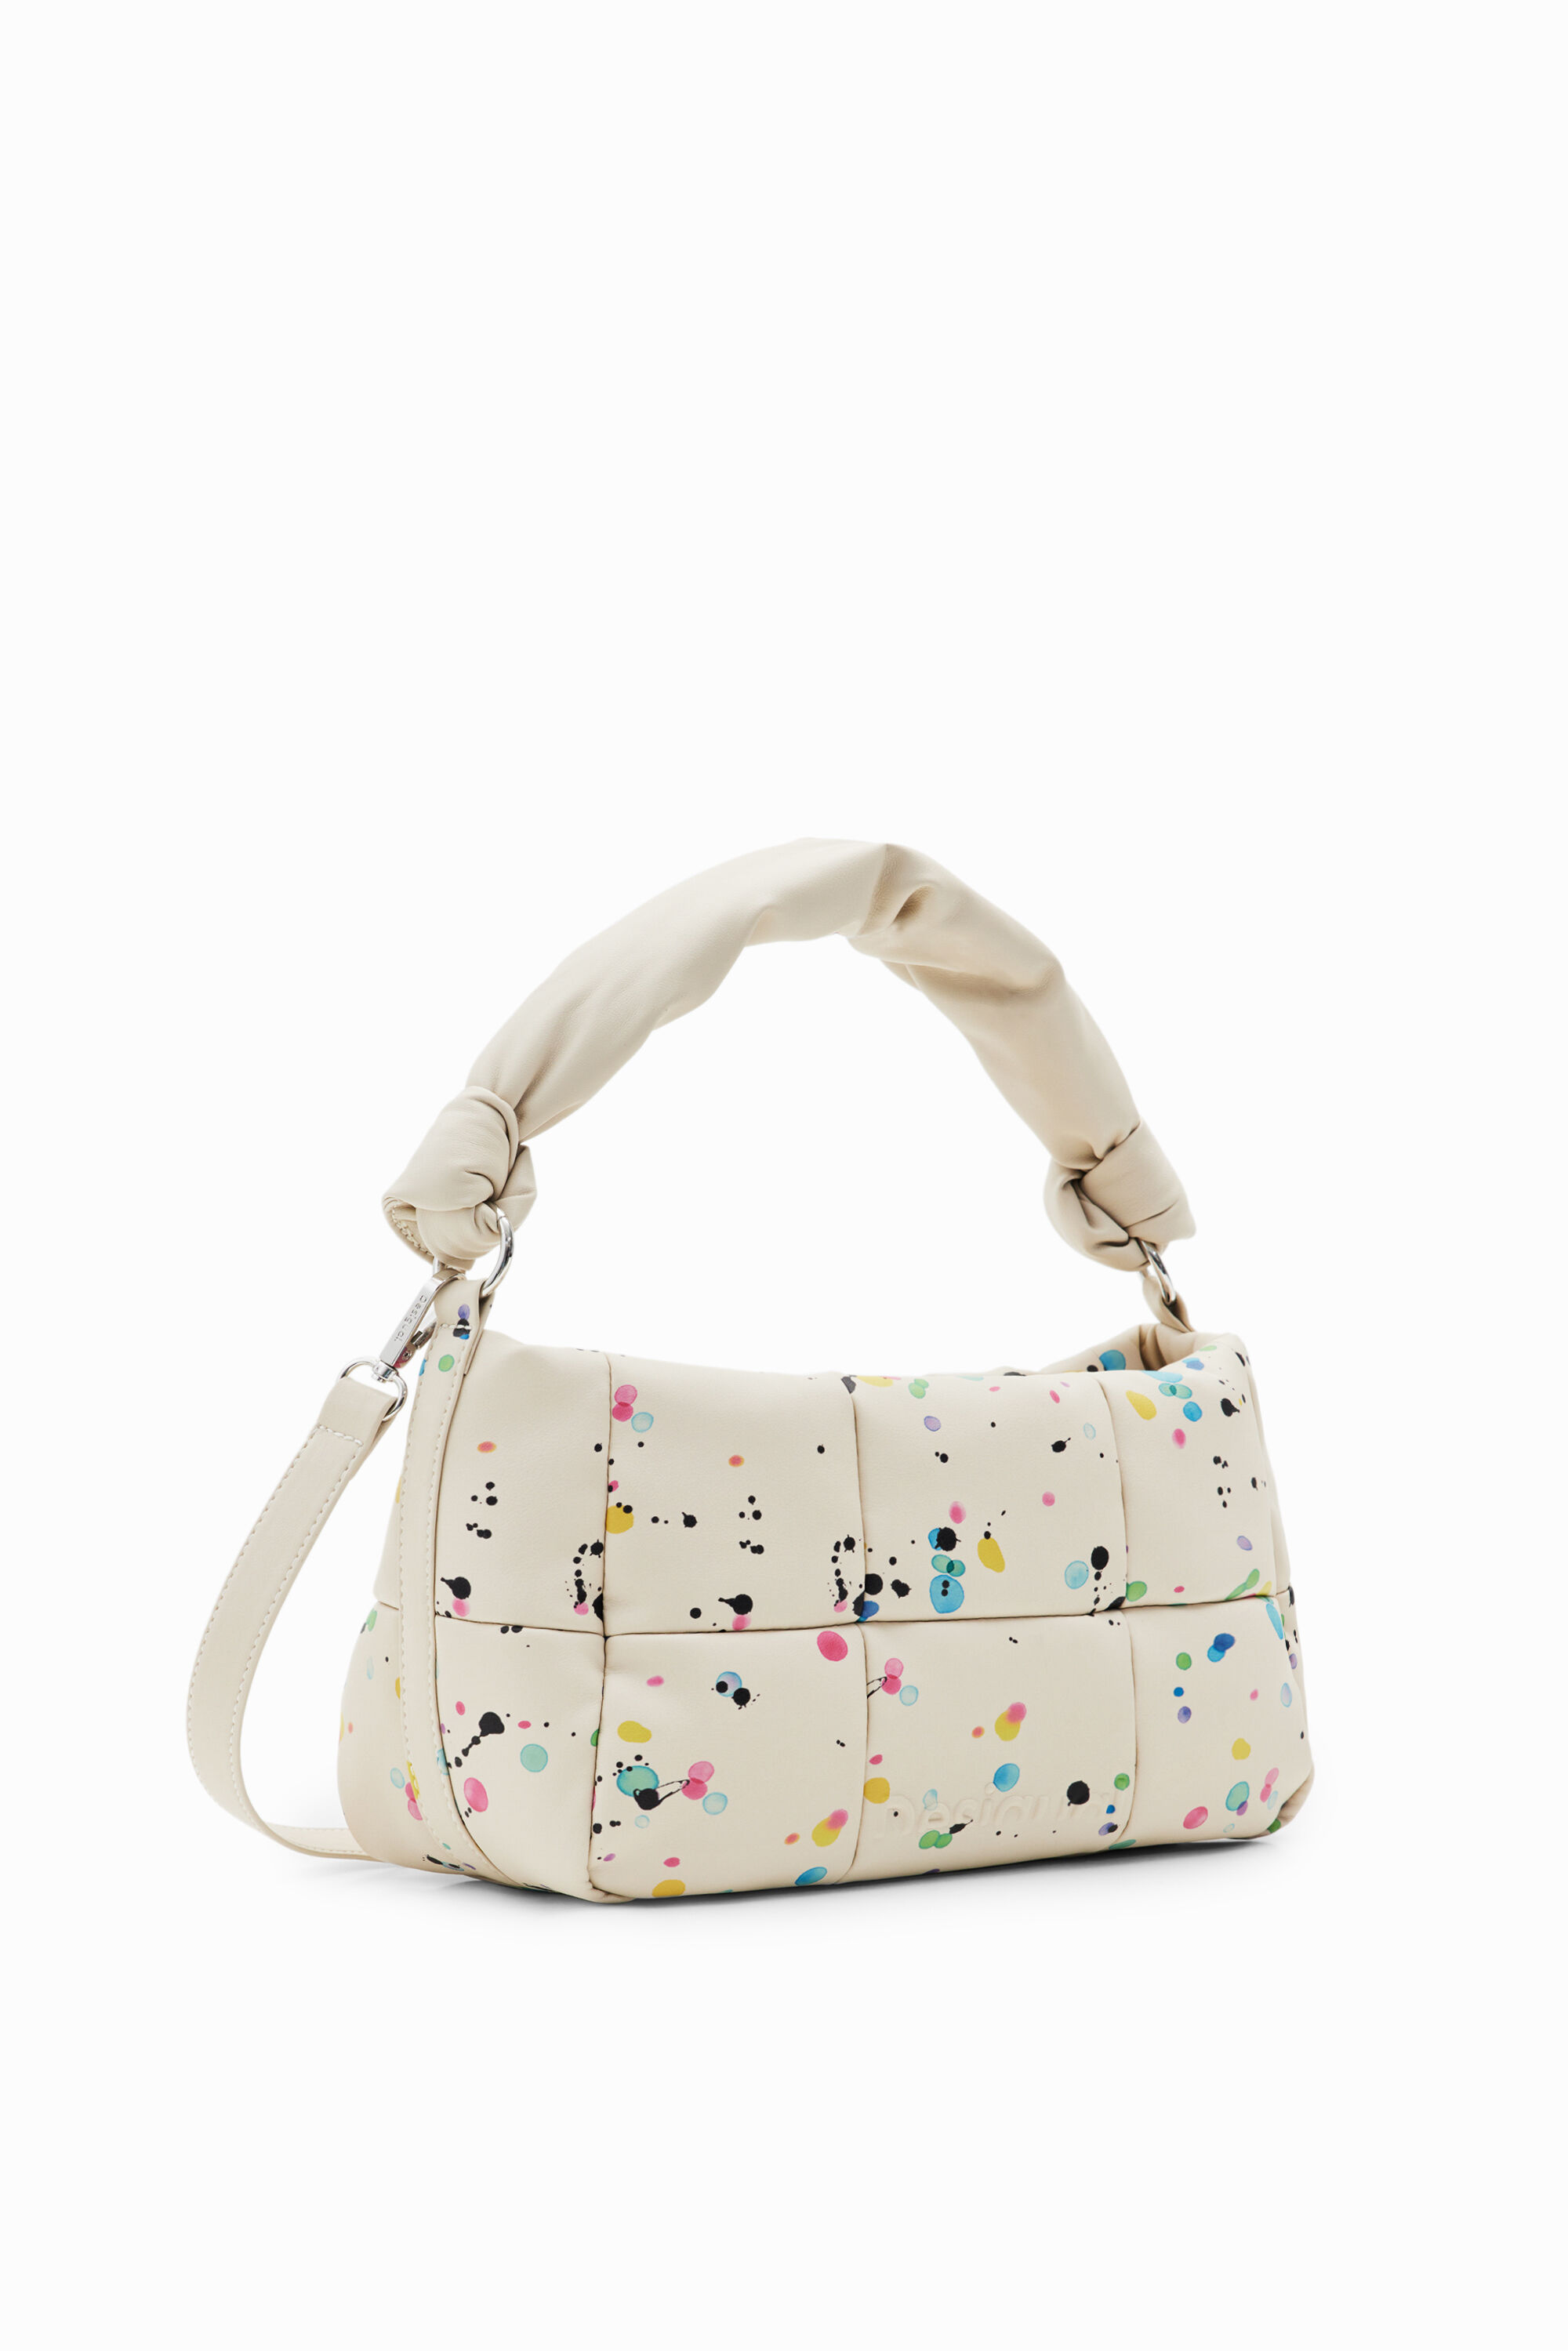 Desigual Droplets quilted bag